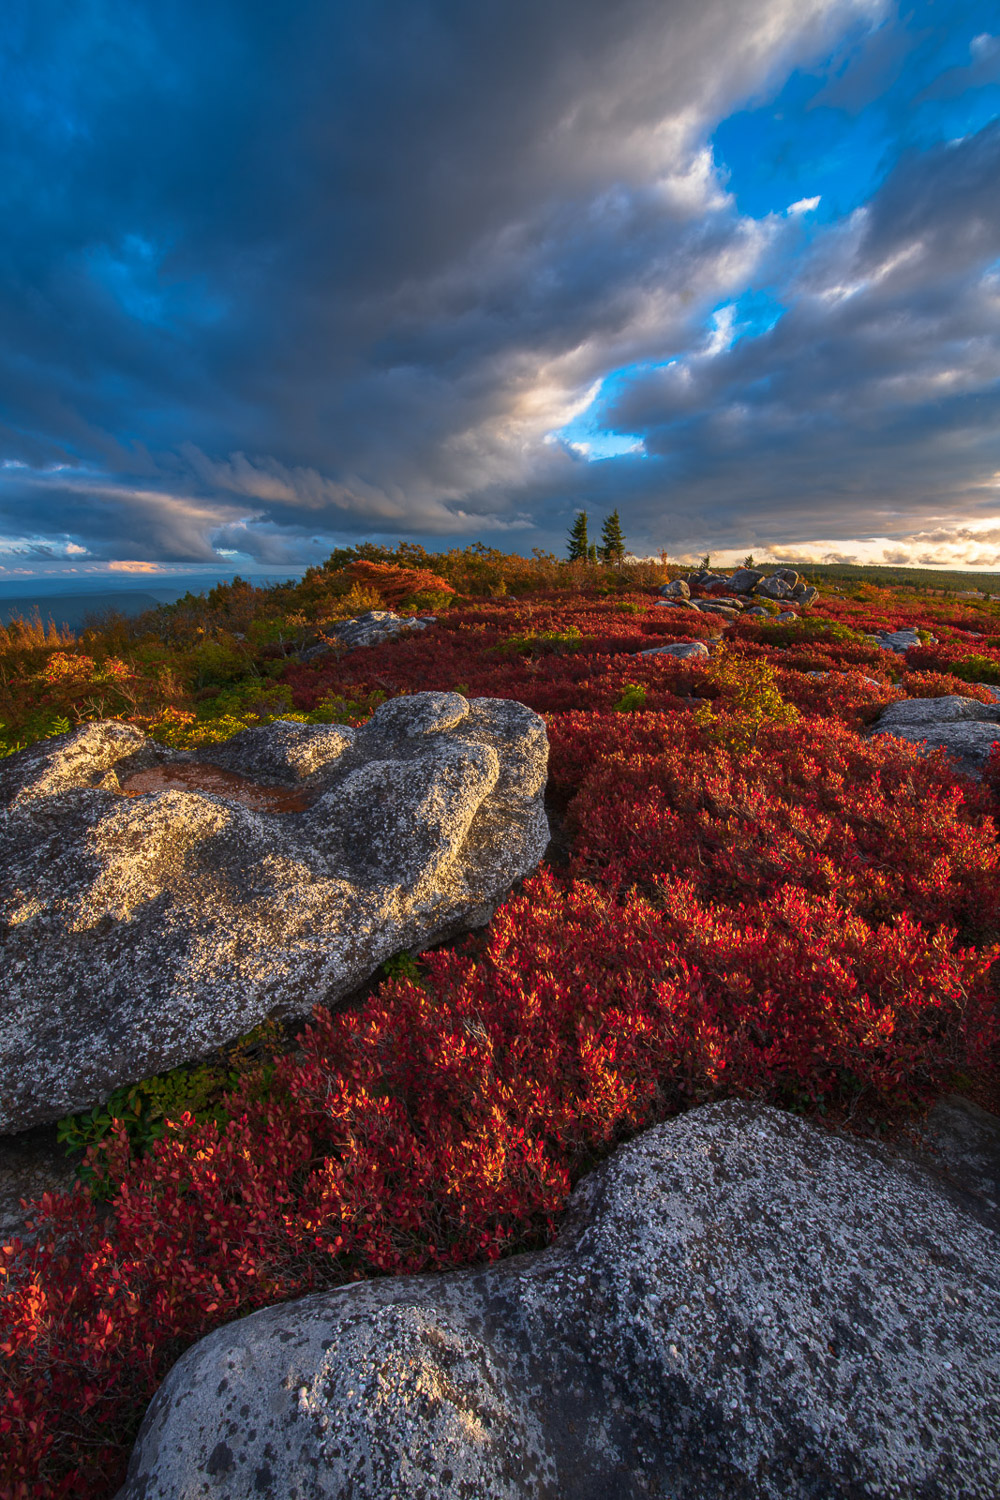 Time stands still high above Canaan Valley, in Dolly Sods, where a flat, windswept expanse of subalpine heath barrens opens up...